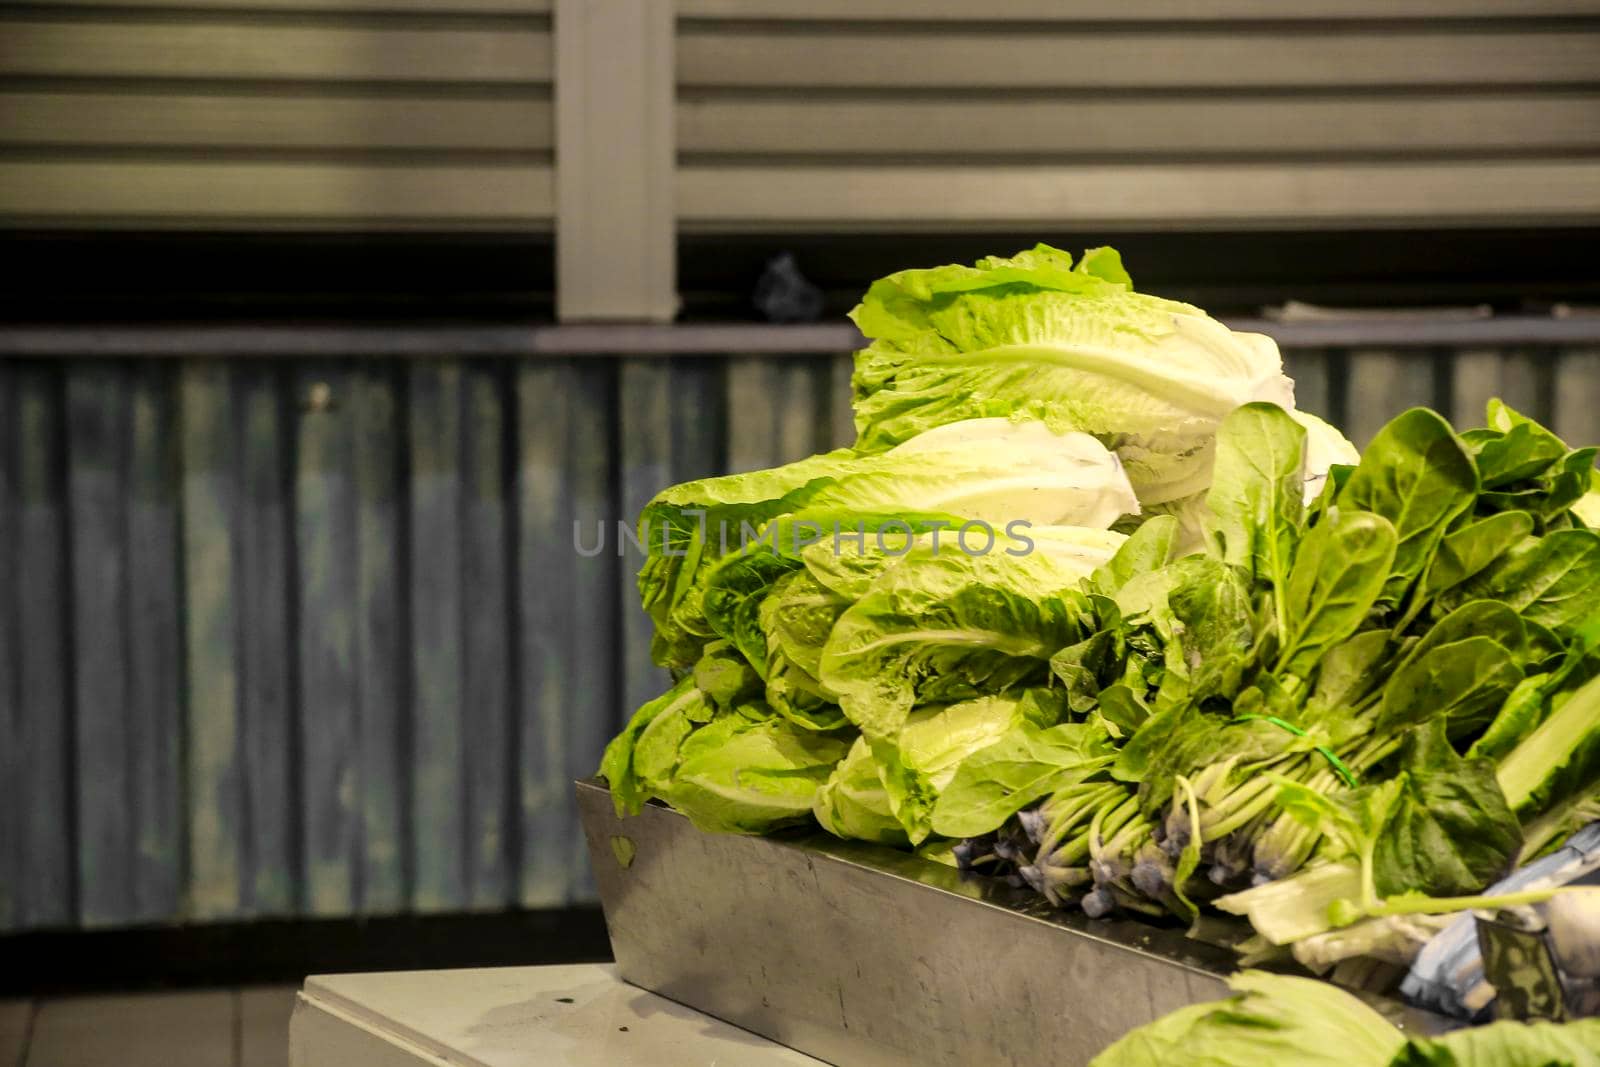 Stacked Lettuces for sale at a market stall in Alicante, Spain.